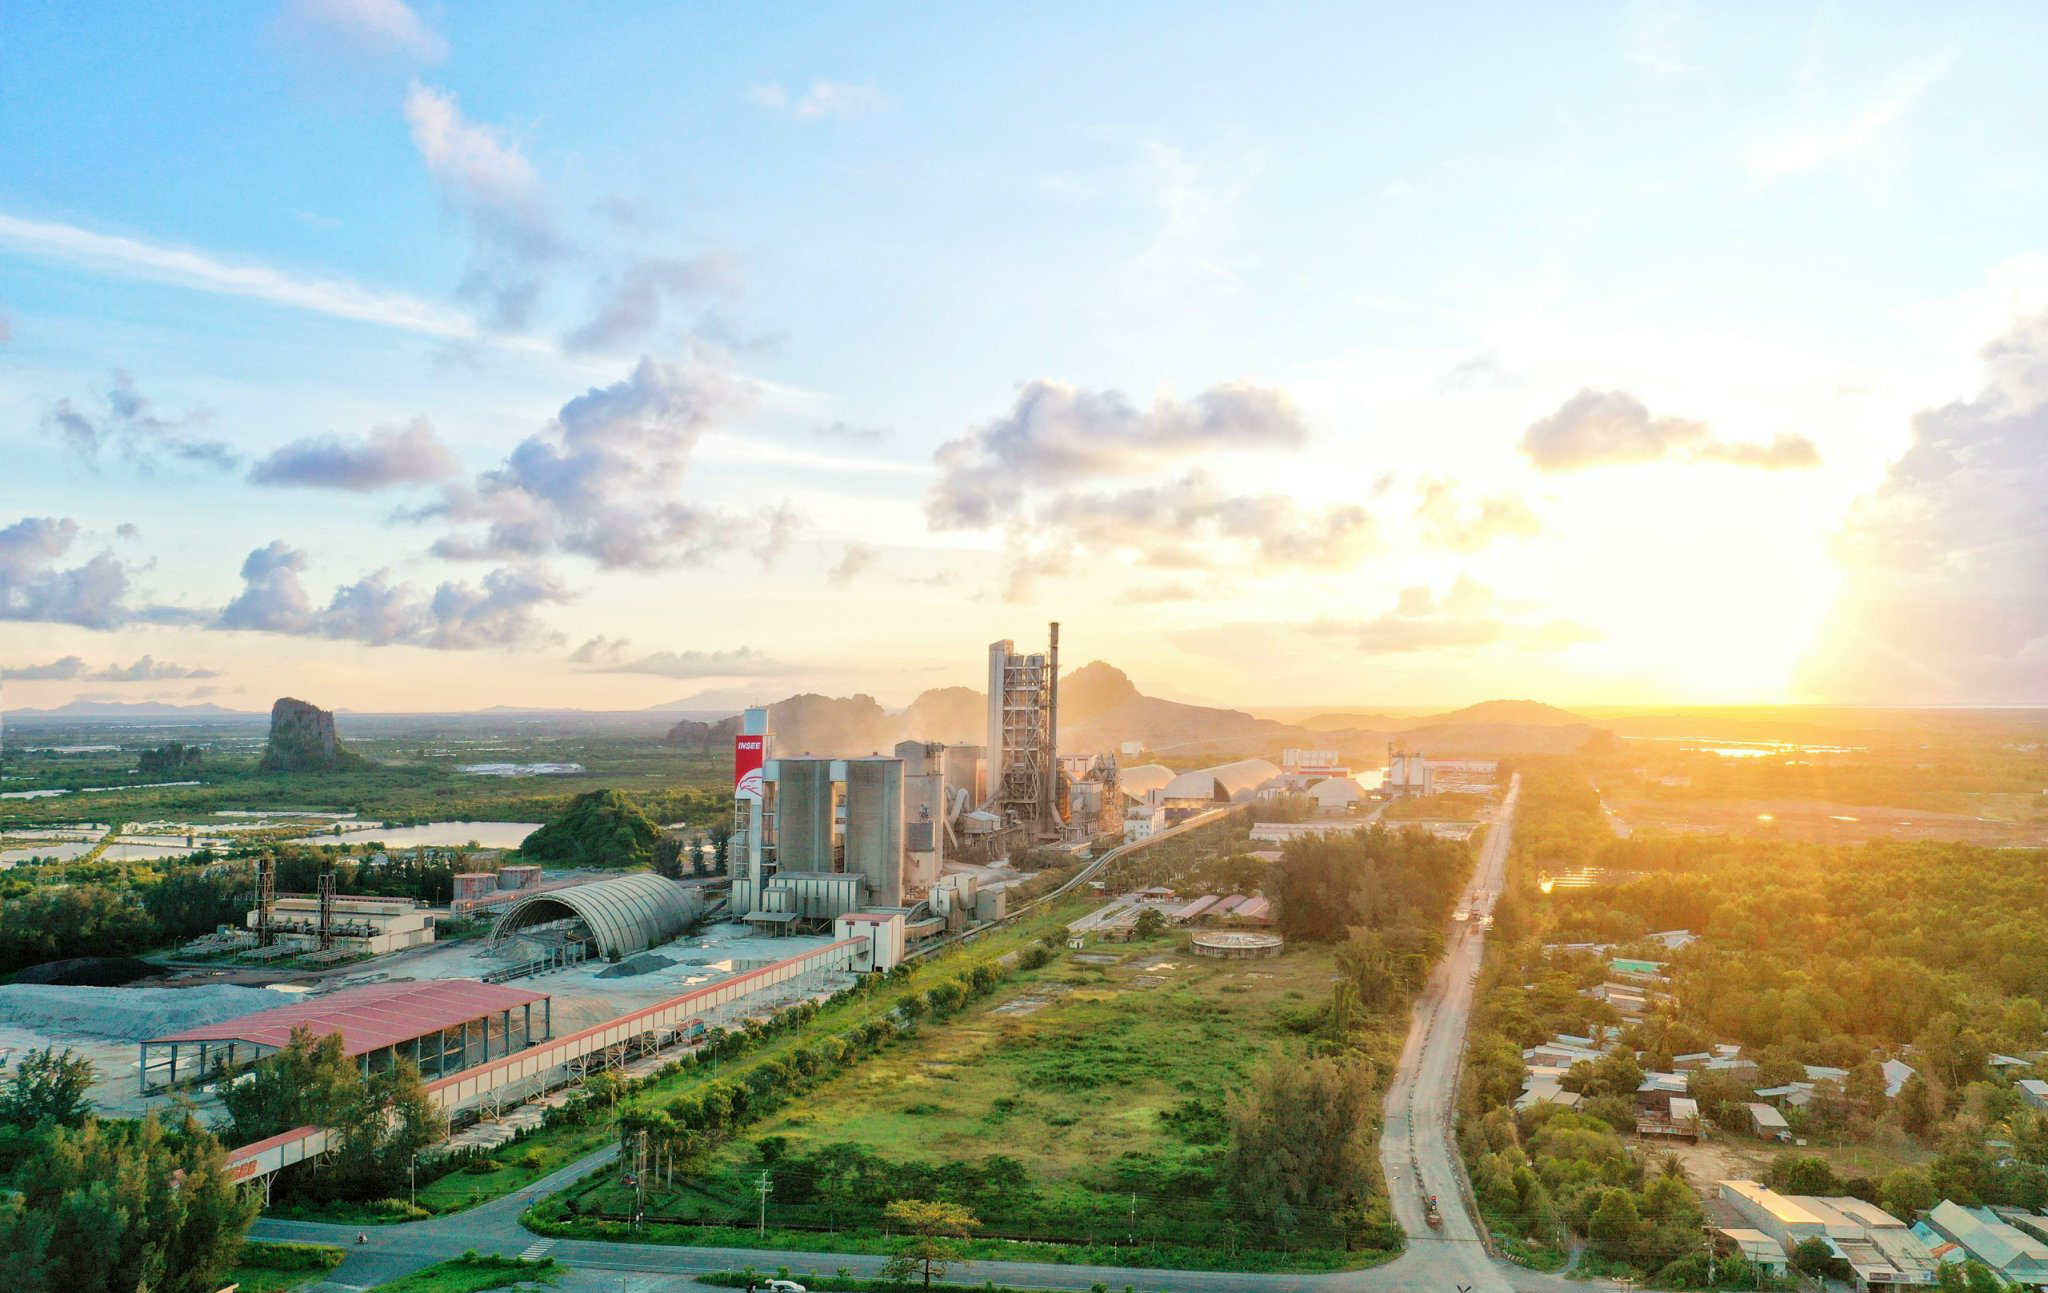 Picture 2: INSEE Hon Chong cement plant in Kien Luong district, Kien Giang province